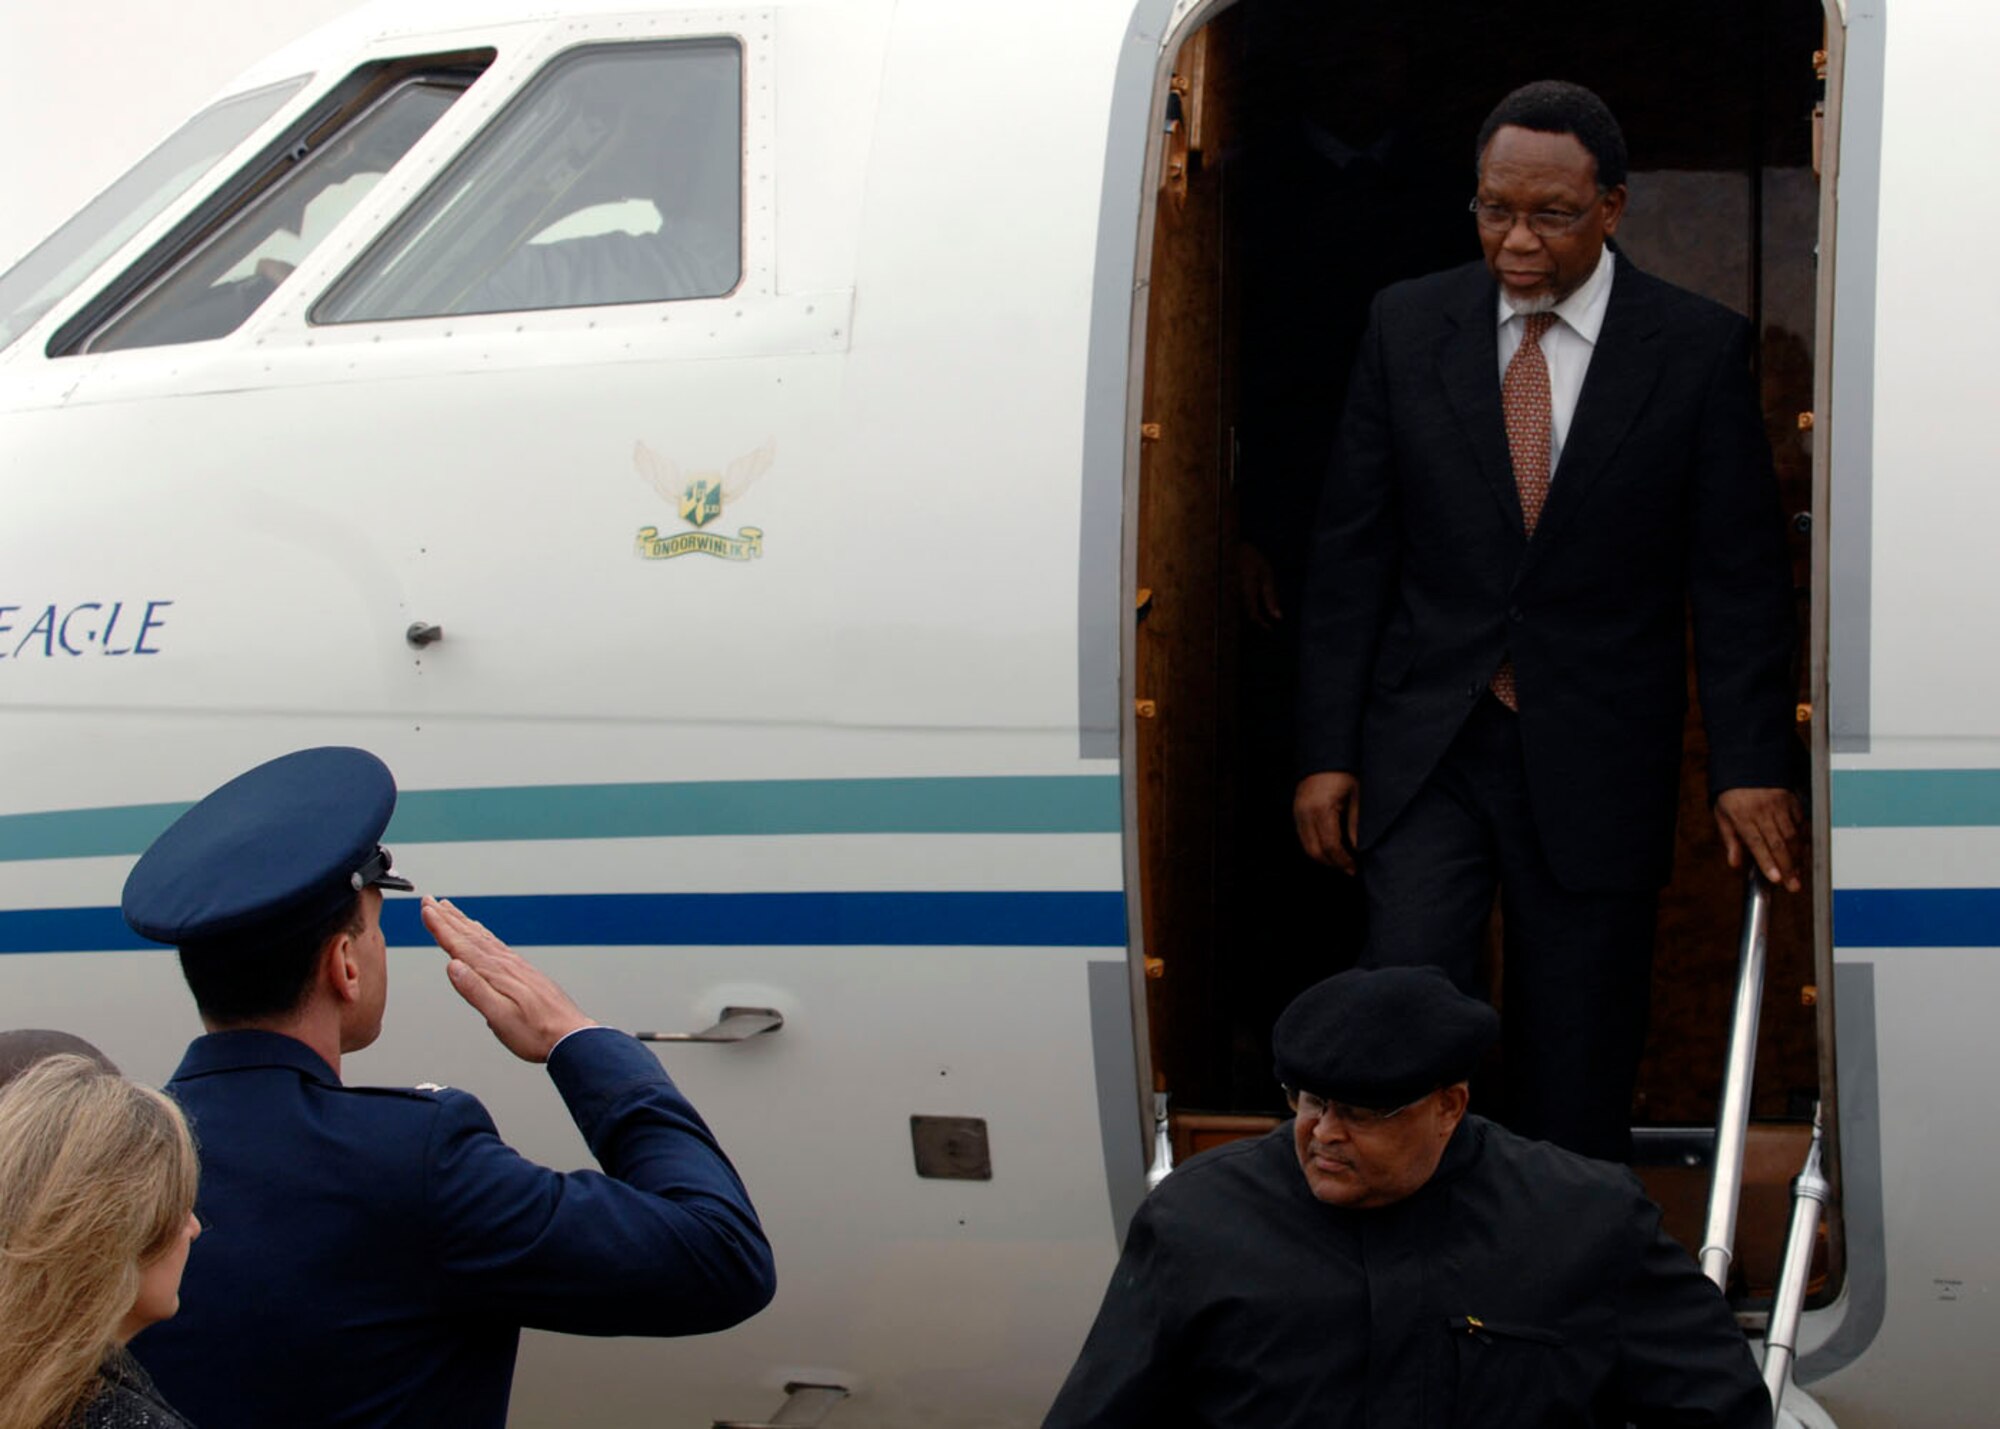 South African President Kgalema Motlanthe lands at Andrews Air Force Base Md., Nov.14, 2008, for the two-day G20 Summit at the White House in Washington. The summit, hosted by U.S. President George W. Bush, will bring together world leaders to discuss the increasing global financial crisis, its causes and efforts to resolve it. (U.S. Air Force photo by Tech. Sgt. Craig Clapper)